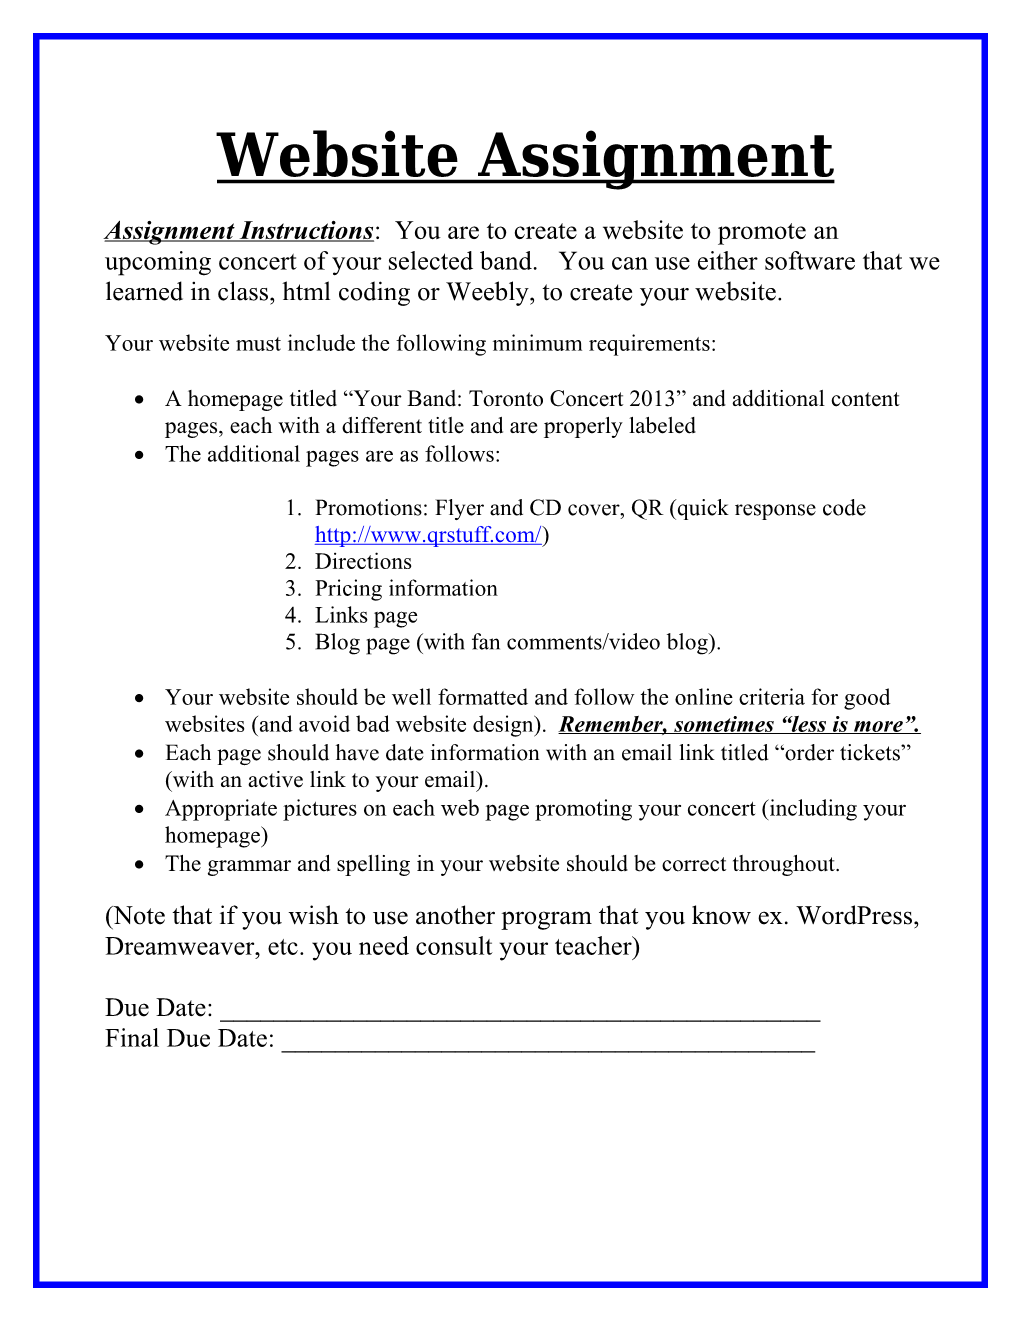 Assignment Instructions: You Are to Create a Website Using Dreamweaver About Your Favorite